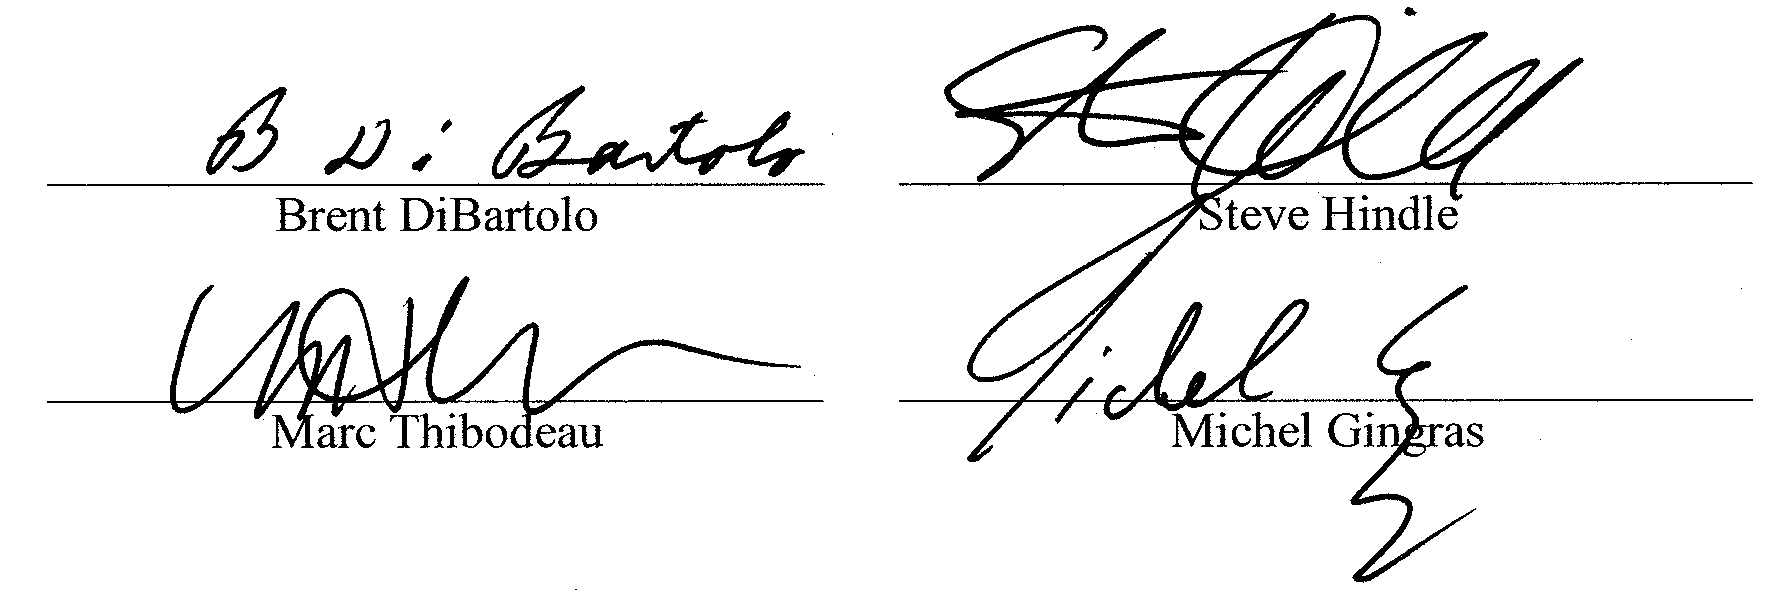 Signature Page - Appendix "B" - ASE Agreement